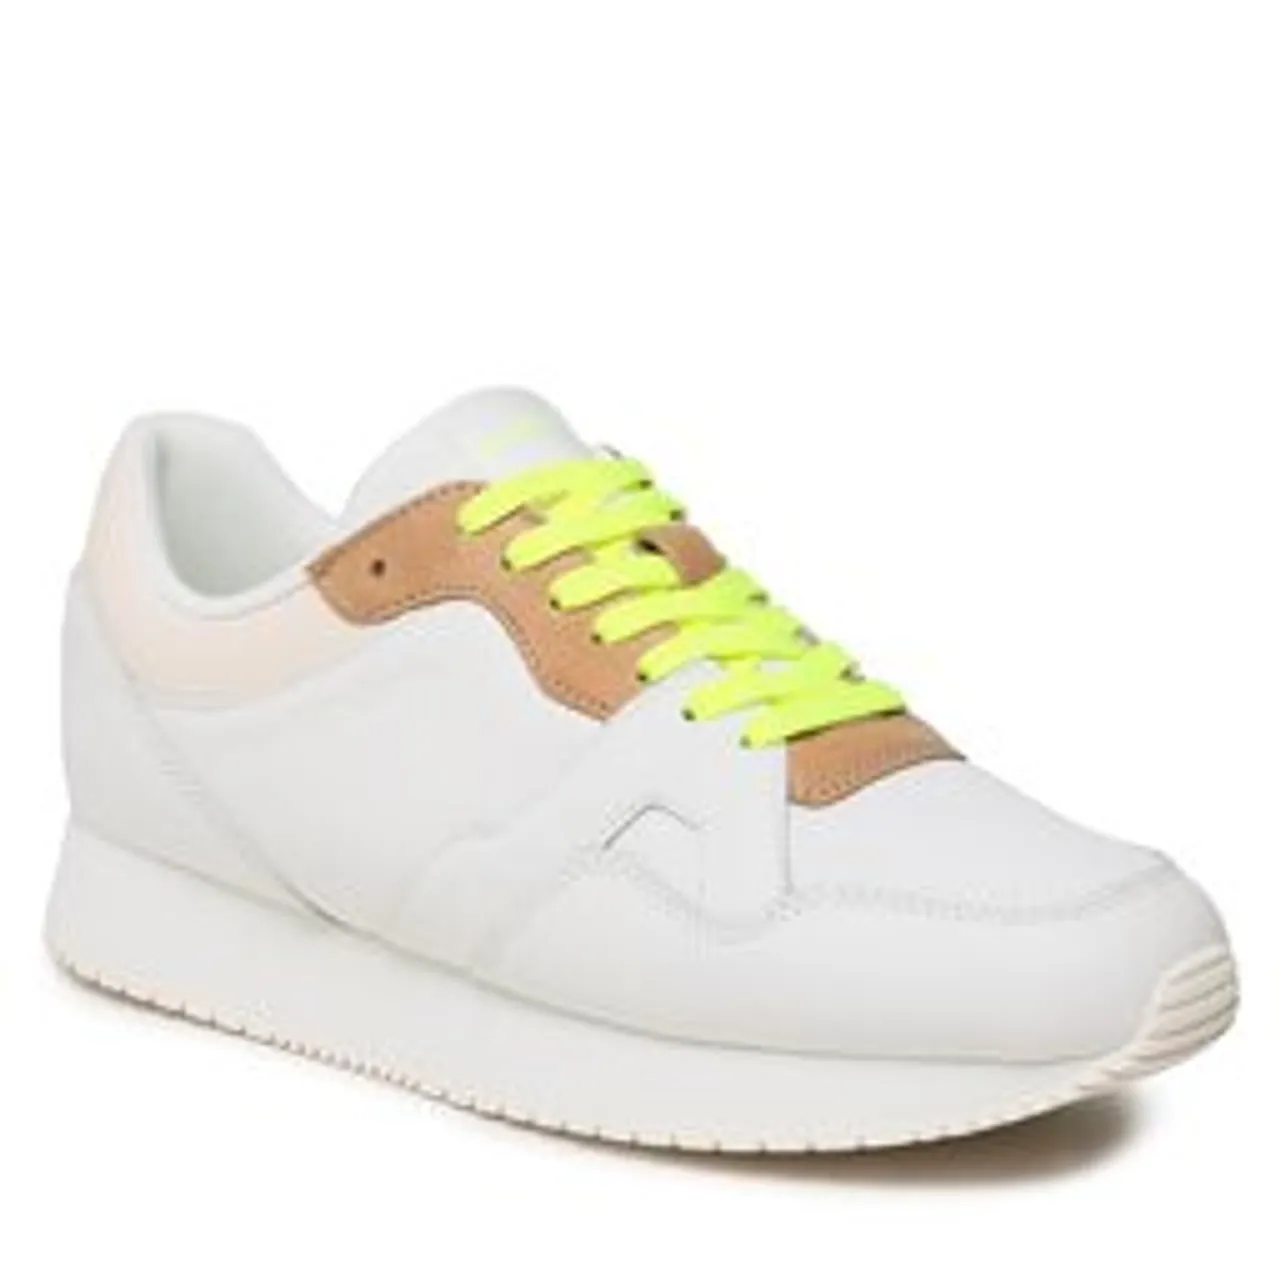 Sneakers Calvin Klein Jeans Retro Runner Fluo Contrast YM0YM00619 White/Ancient White 0LA